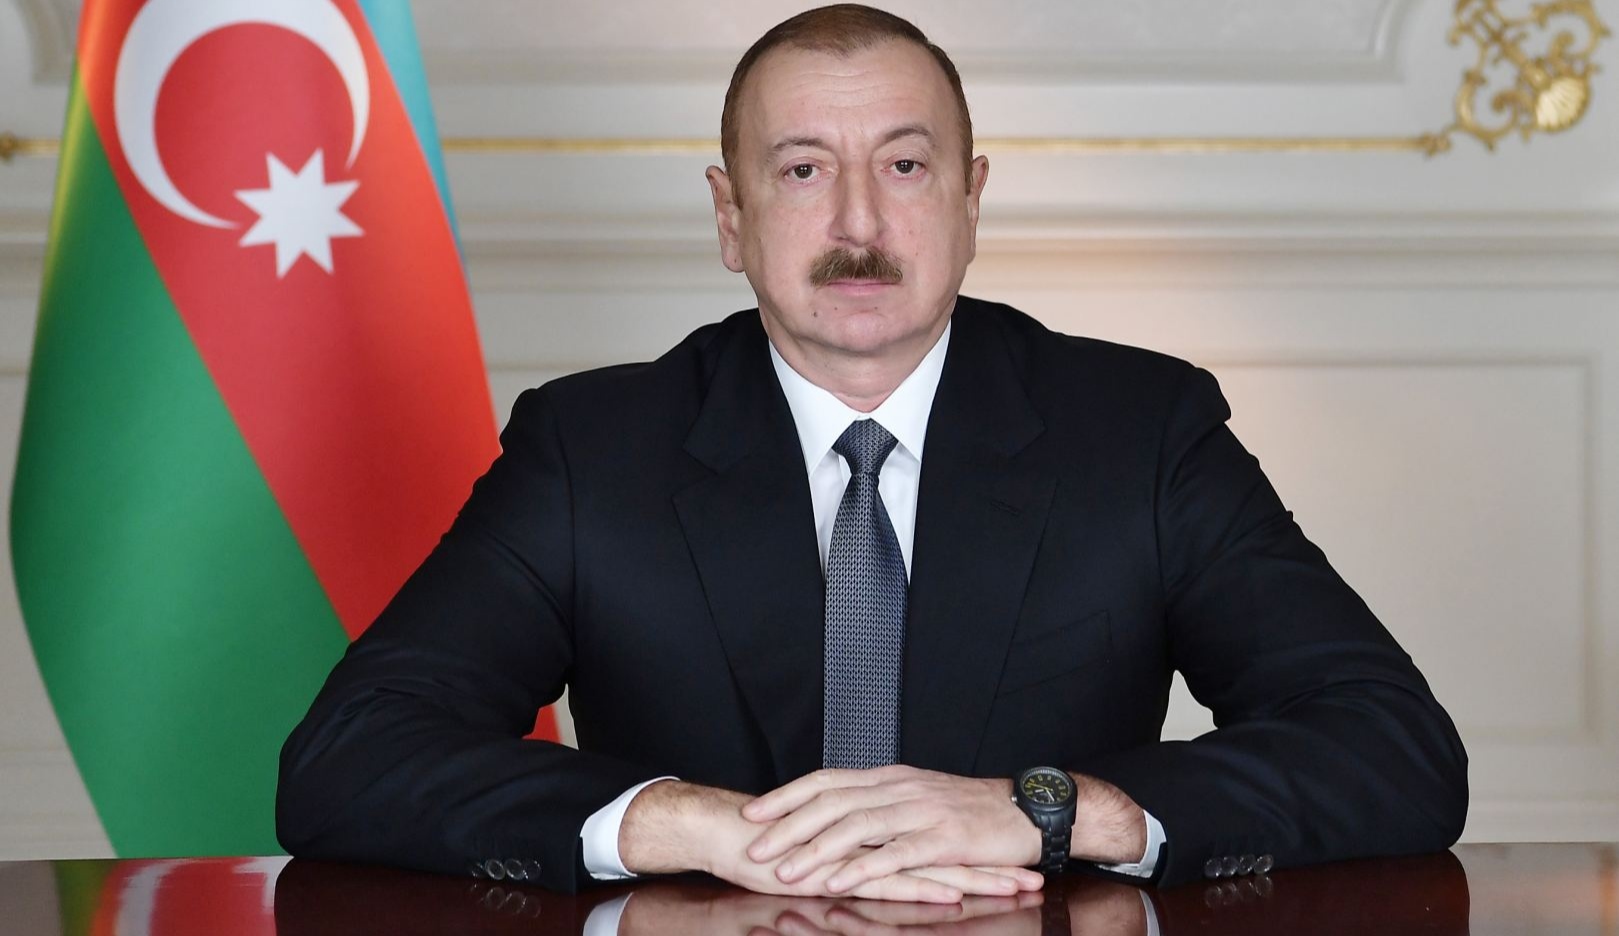  President Ilham Aliyev shares a post regarding the Day of the Armed Forces of Azerbaijan  